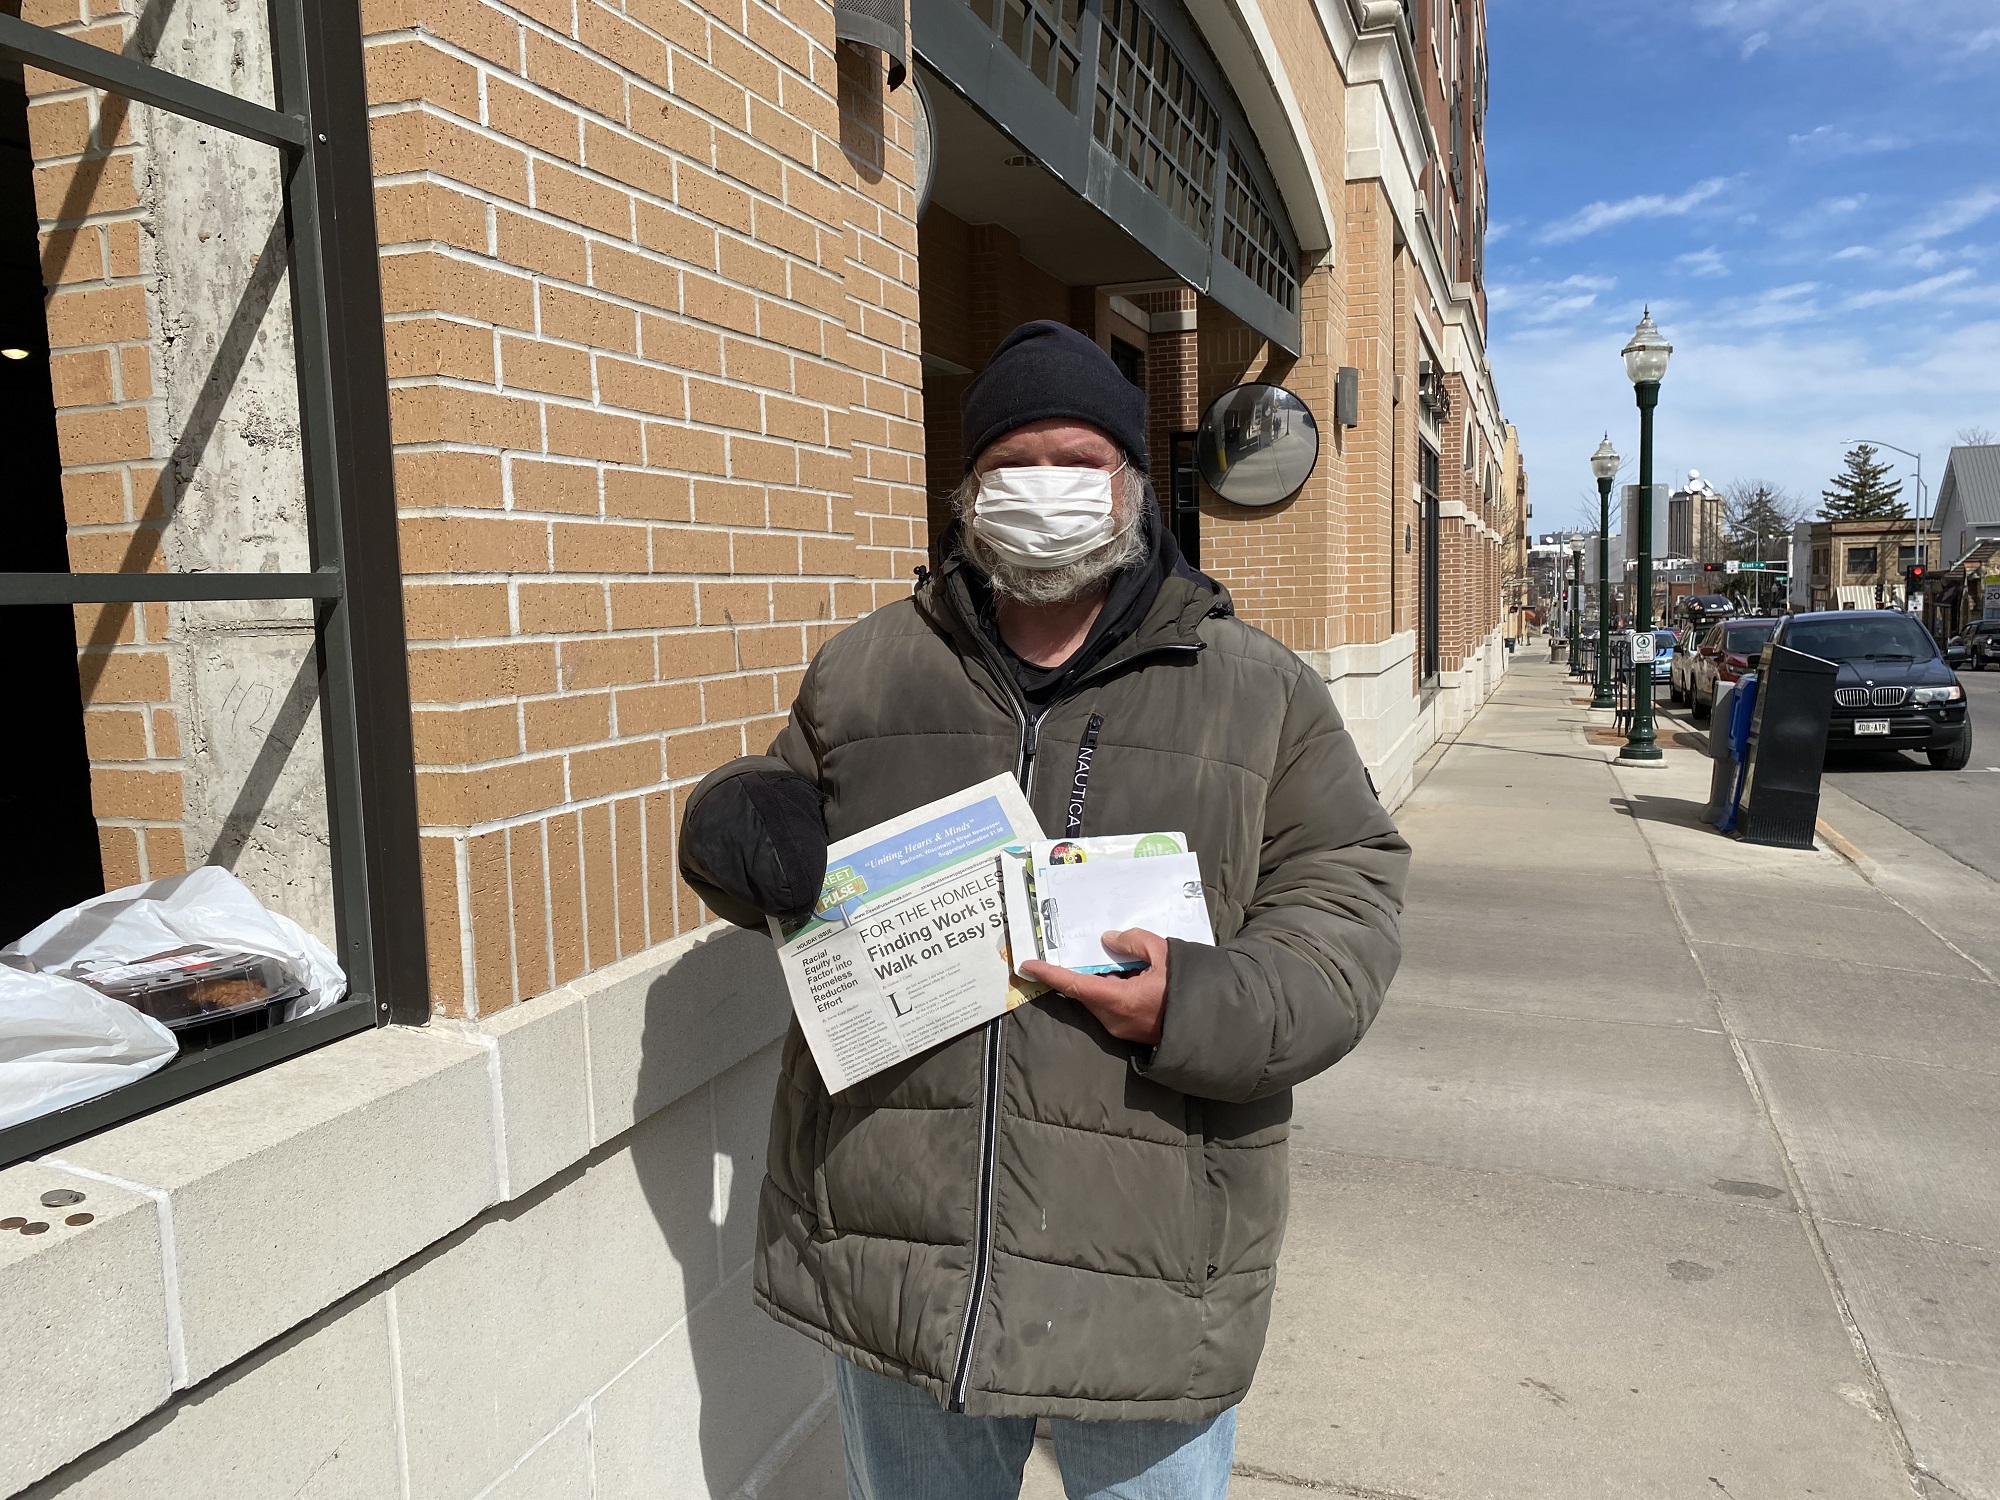 Chris Hubbard stands outside of Trader Joe’s in Madison on March 14, 2020, with the holiday issue of Street Pulse newspaper and some photography prints. It was his 52nd birthday. (Alyssa Allemand/WPR) 